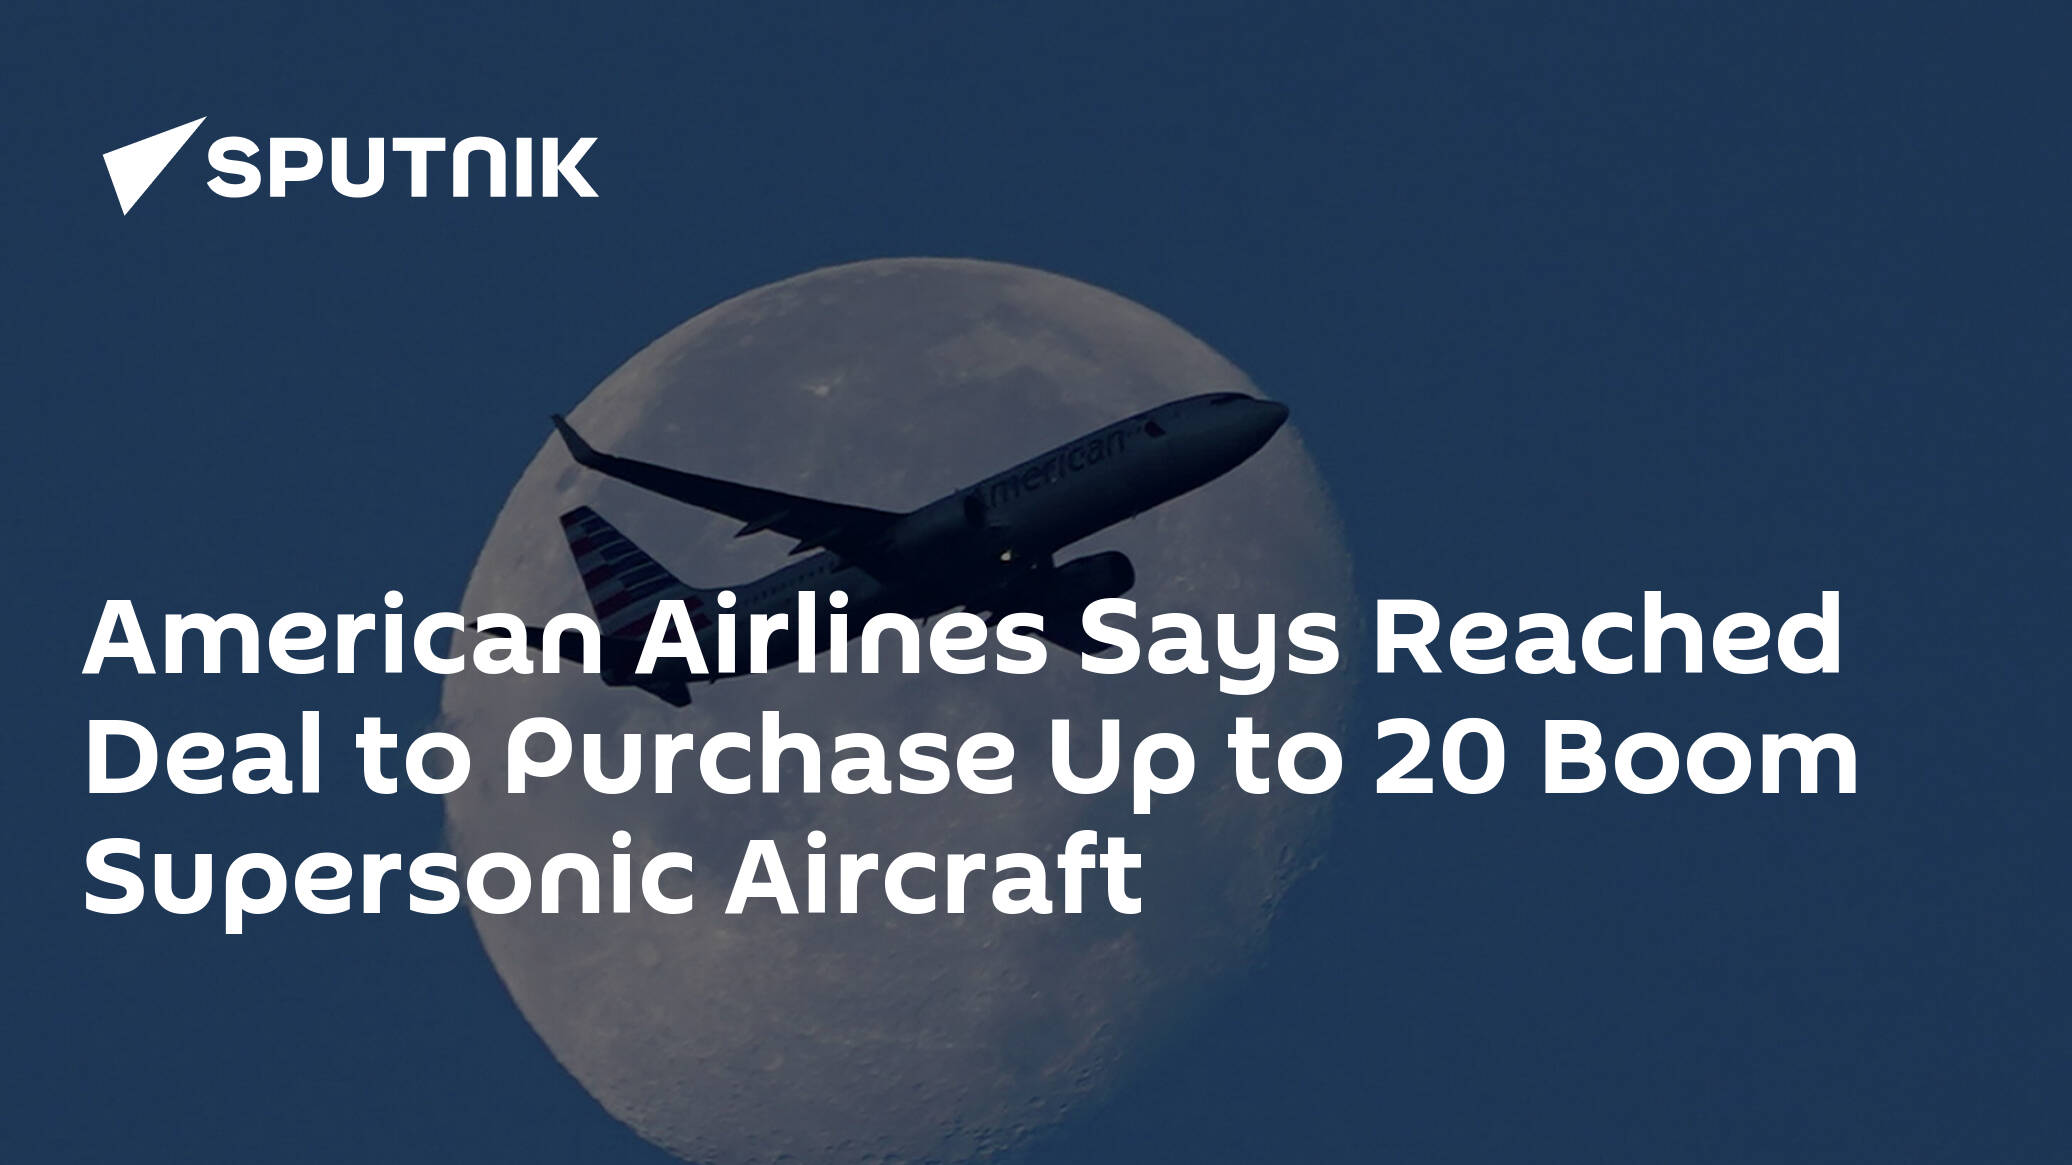 American Airlines announces agreement to purchase Boom Supersonic Overture  aircraft